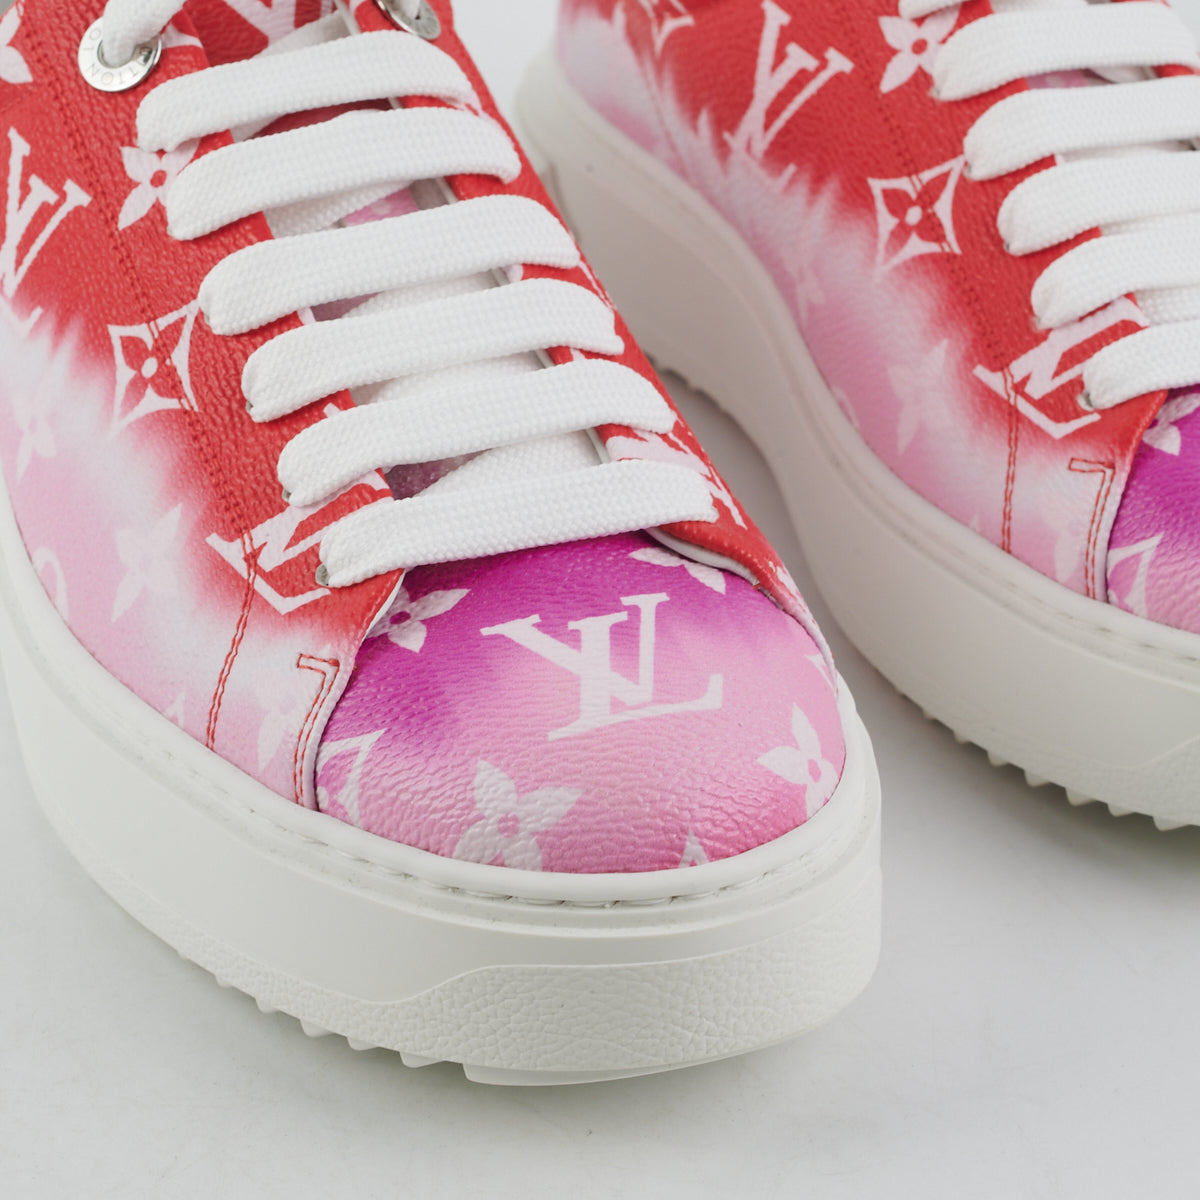 Louis Vuitton, Shoes, Size 8539 Authentic Louis Vuitton Time Out Sneaker  Red And Pink